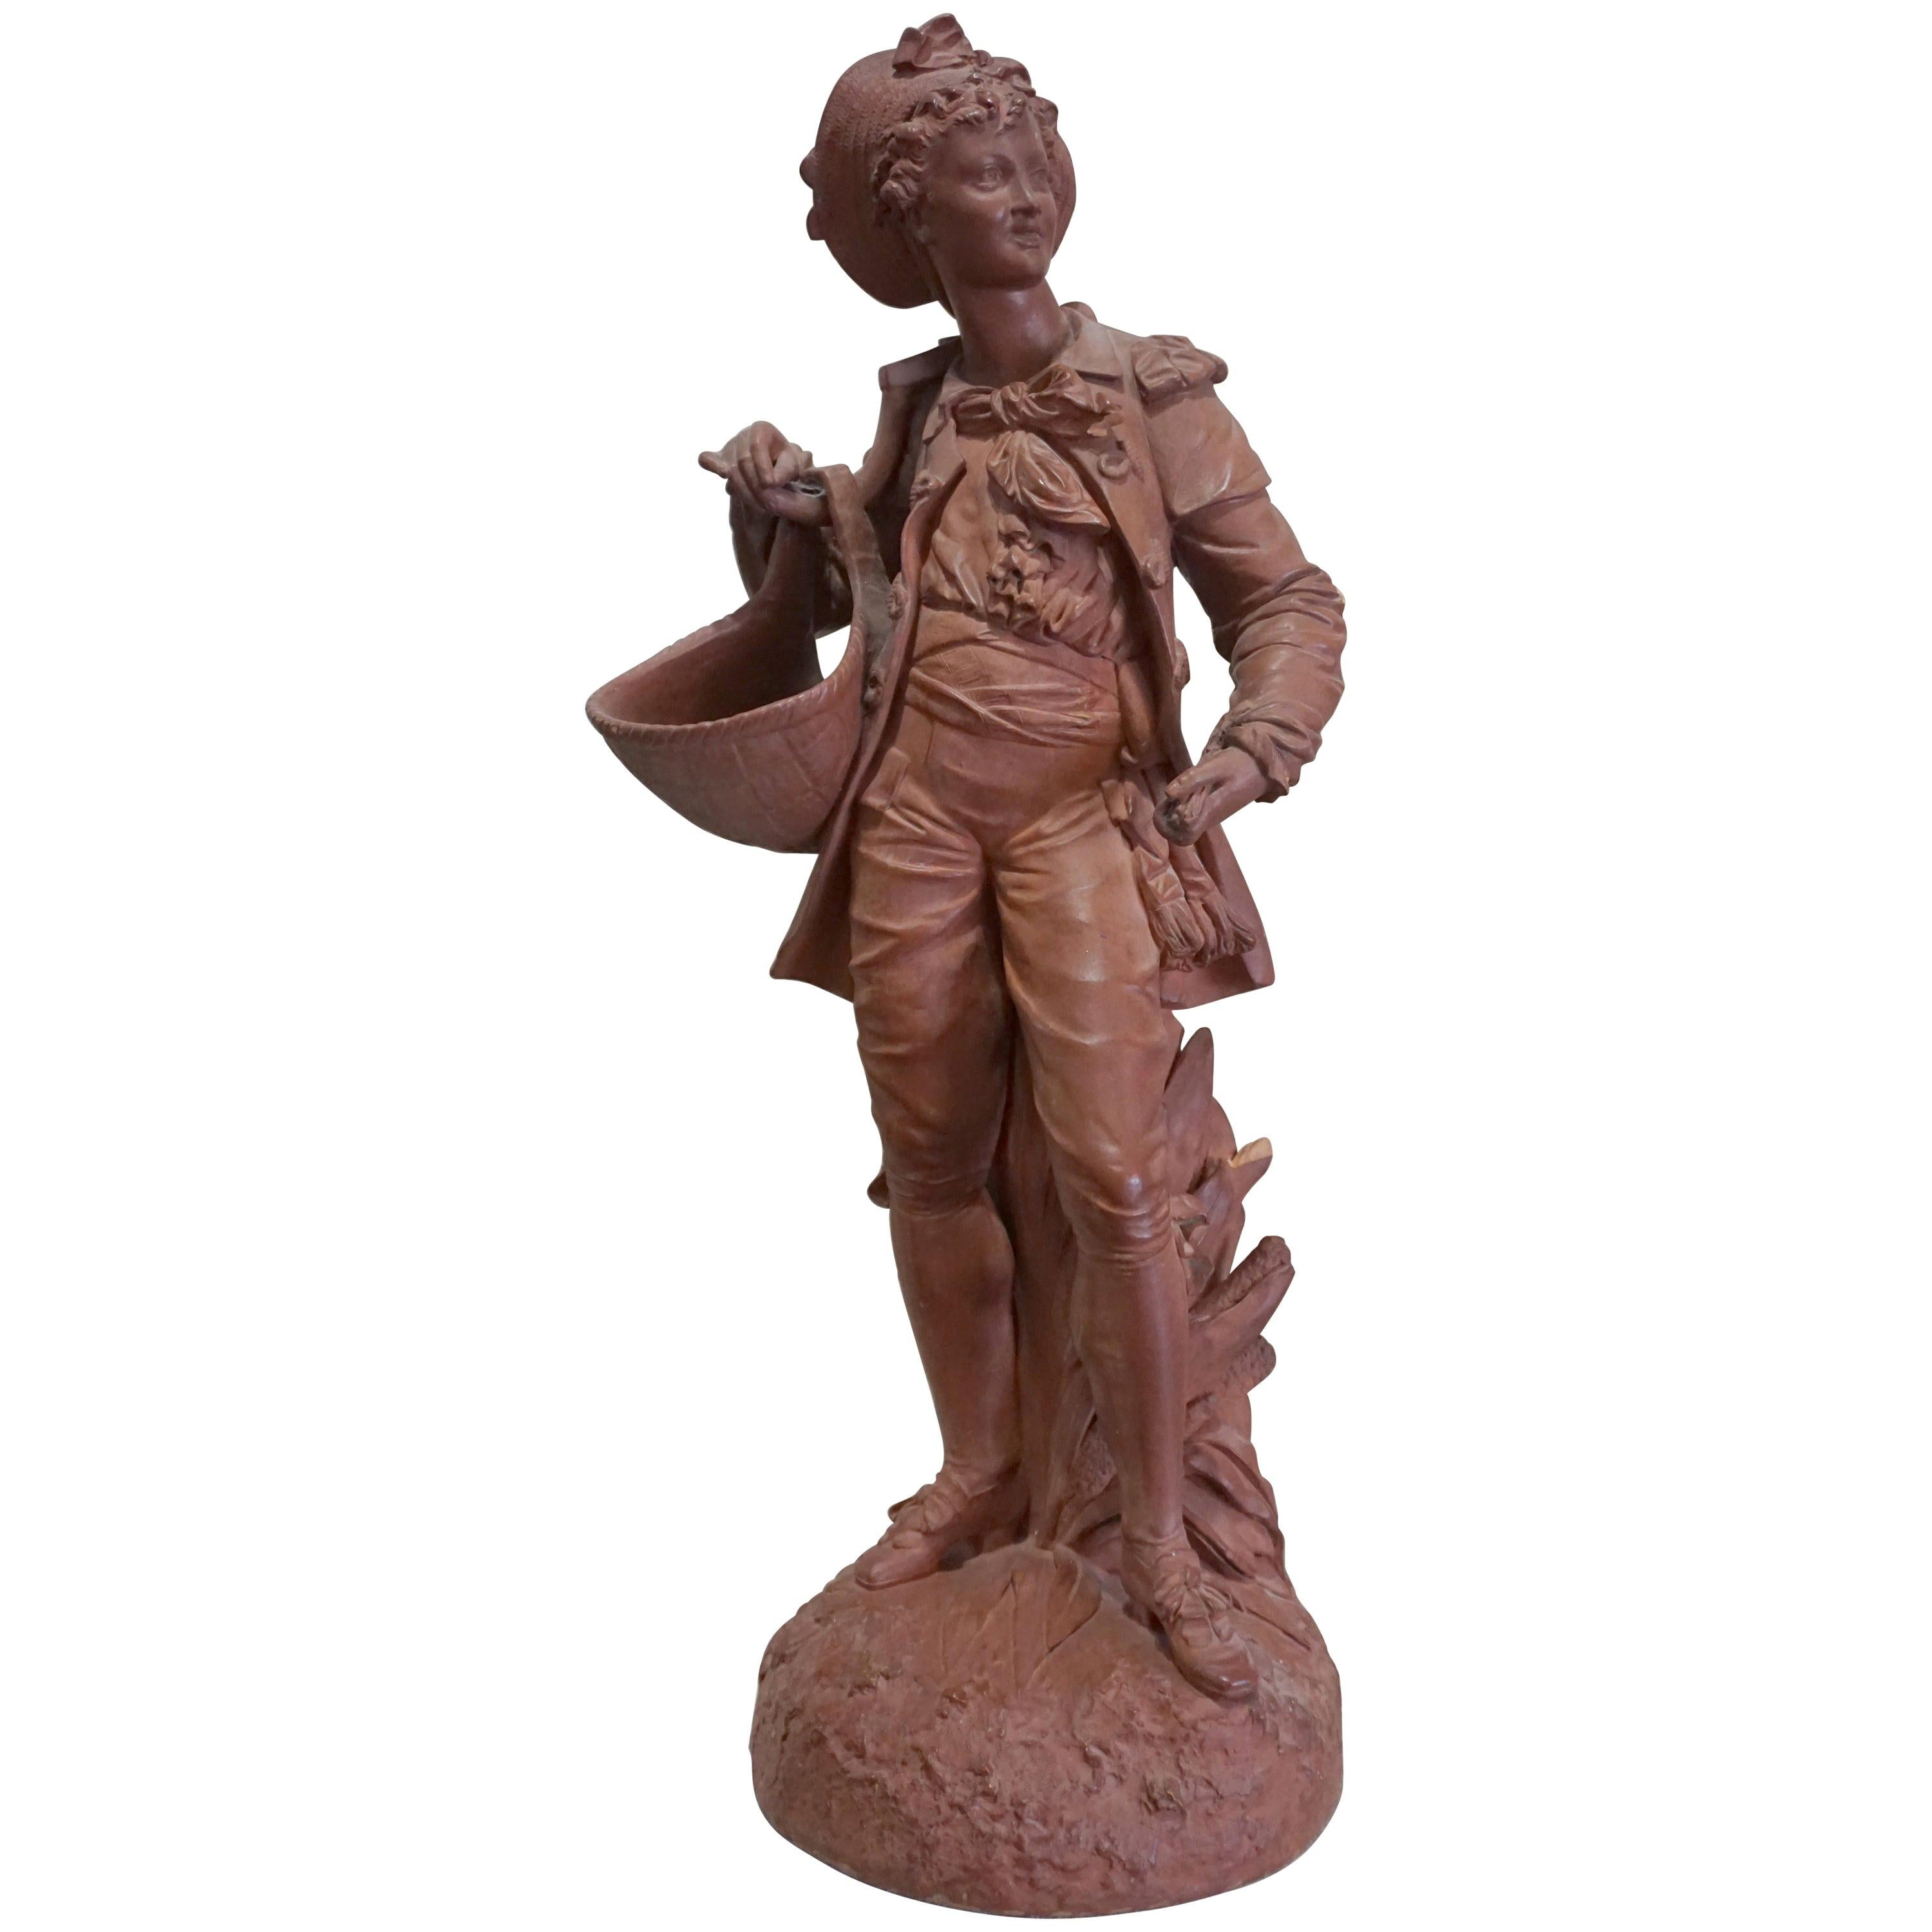 Terracotta Statue of Young Boy